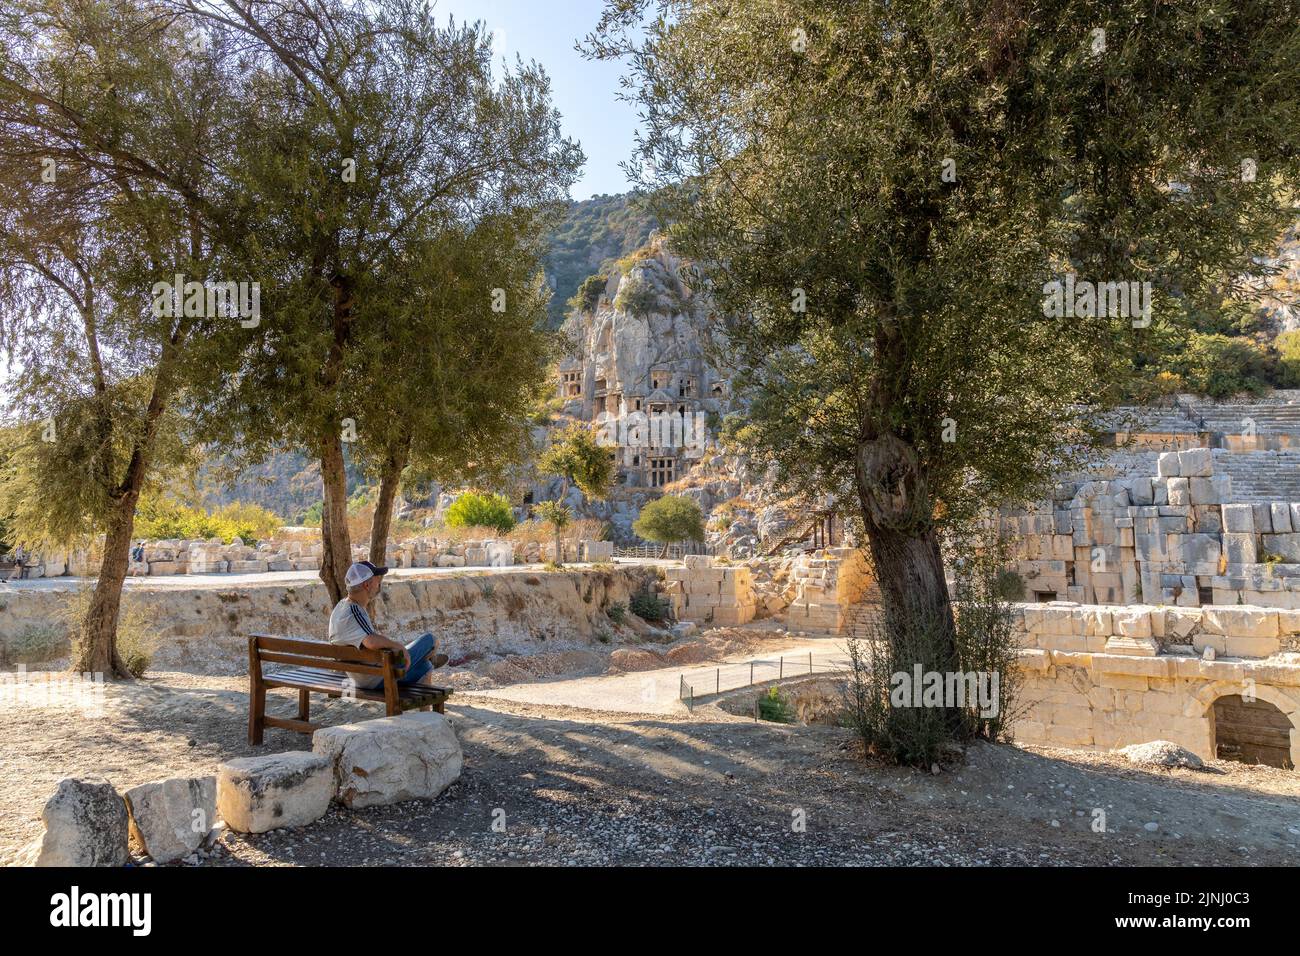 Historical Myra ancient city. The man is sitting in the shade under the trees on a sunny summer day. Rock-cut tombs Ruins in Lycia region. Stock Photo